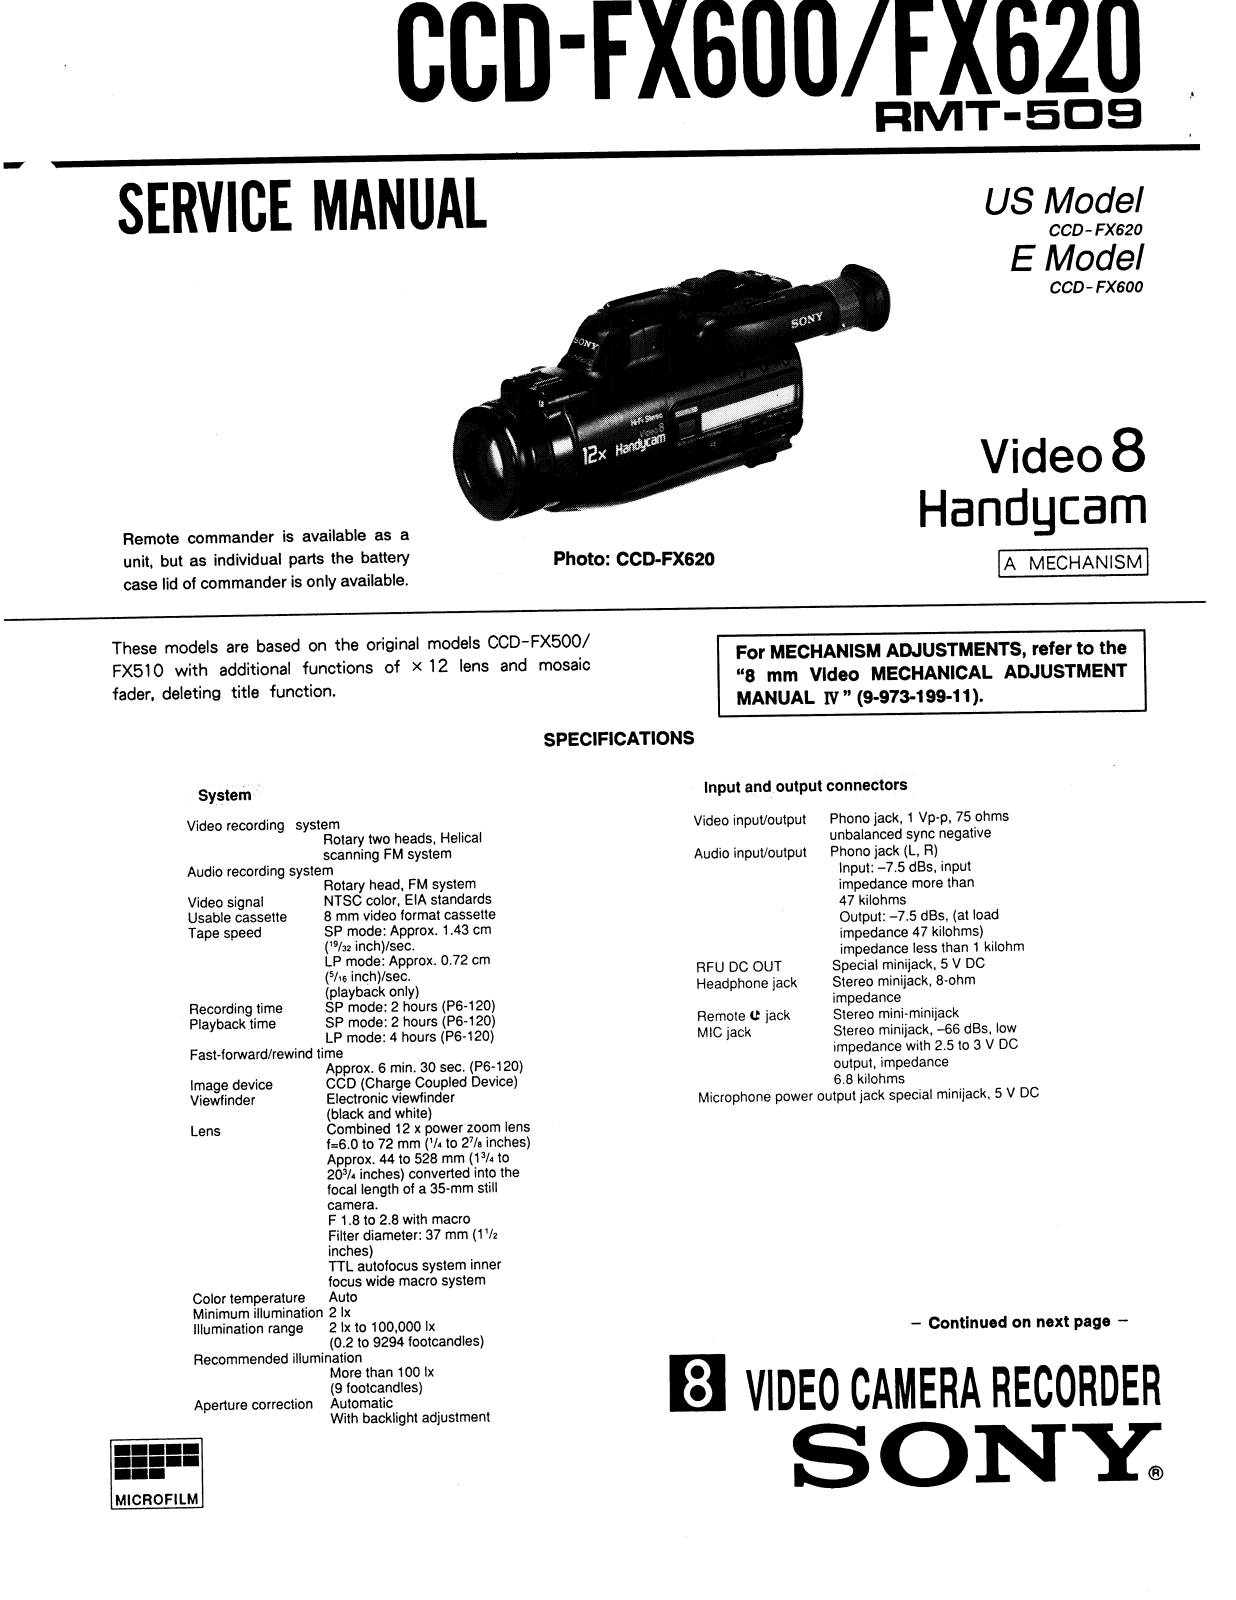 SONY CCD - FX 600, CCD - FX620 Service Manual